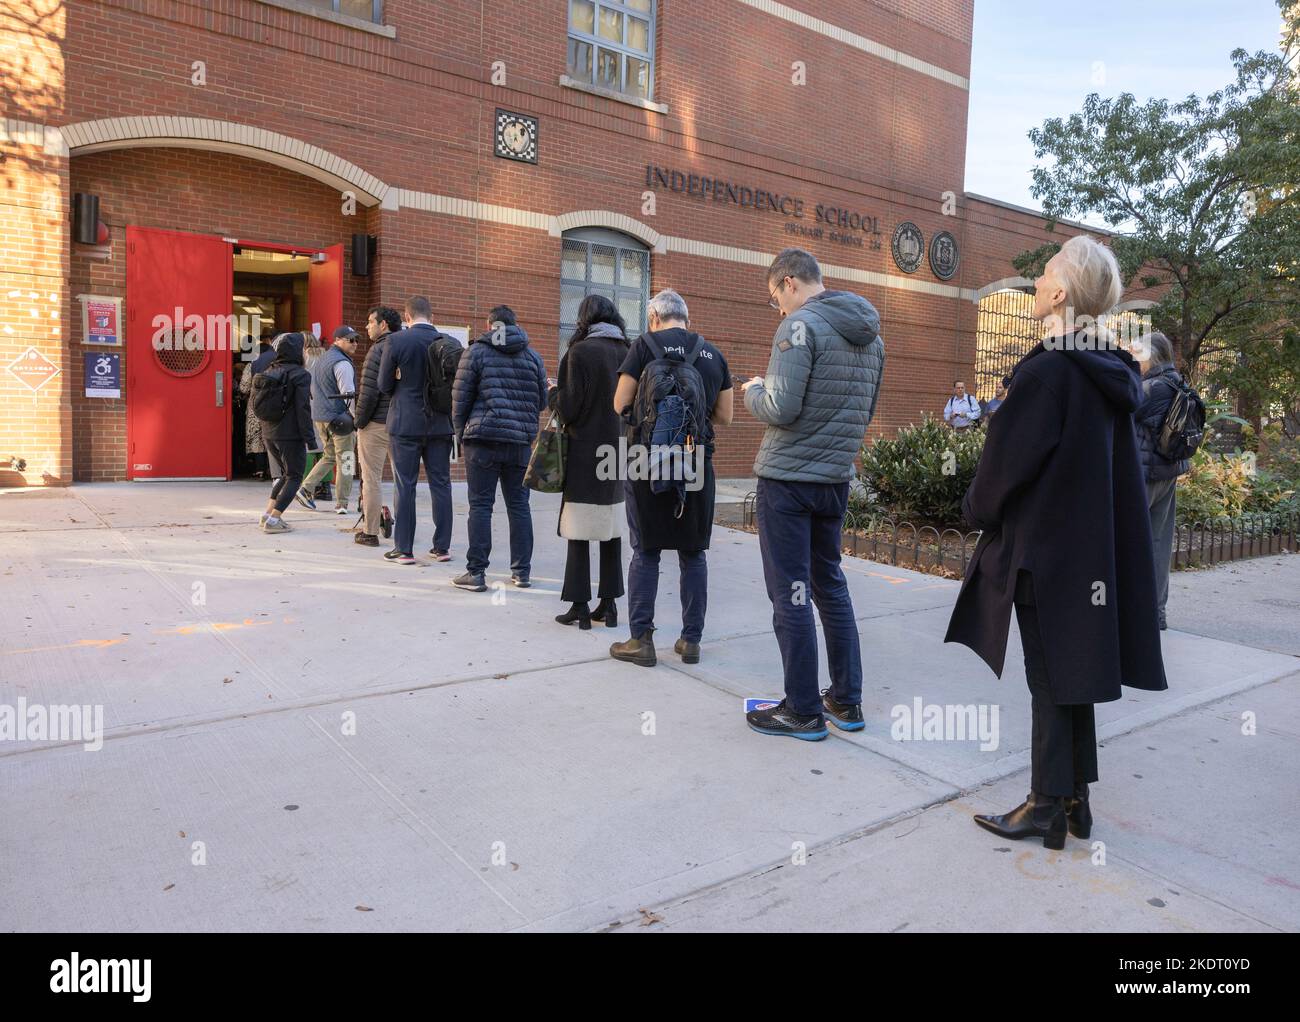 NEW YORK, N.Y. — November 8, 2022: Voters line up outside a polling site in Manhattan’s TriBeCa neighborhood on Election Day 2022. Stock Photo